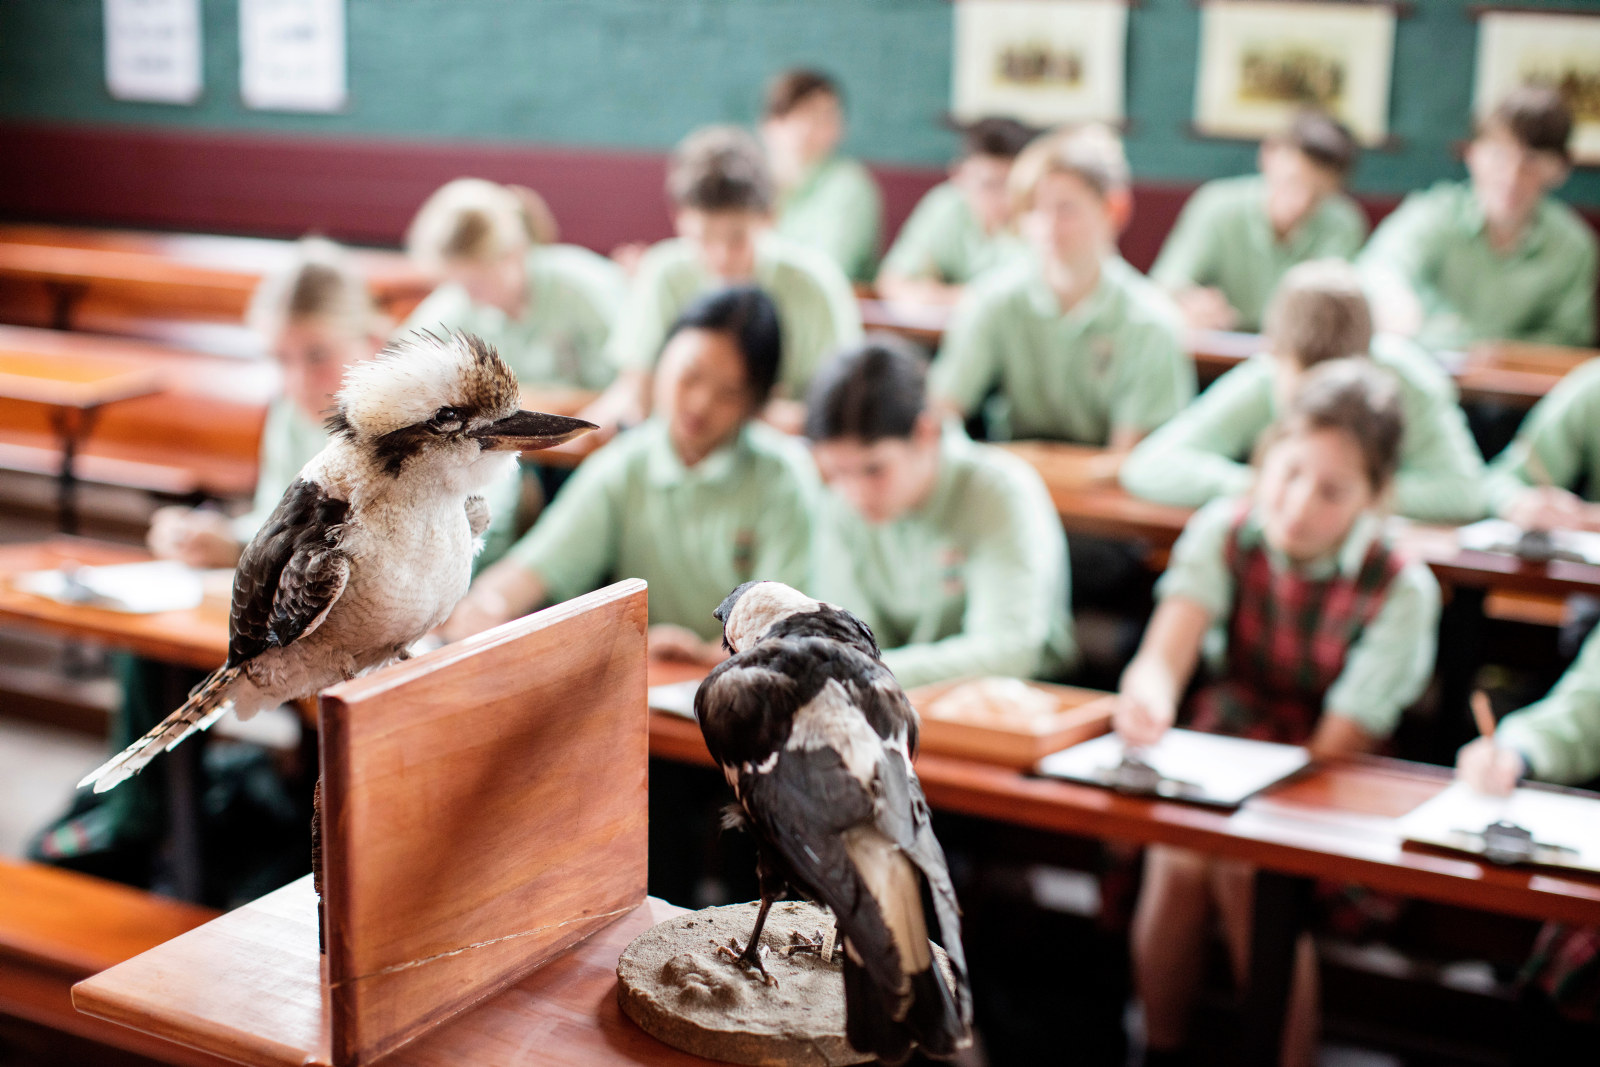 Taxidermied birds at the Rouse Hill Public School 1888, a Kookaburra and a Magpie being sketched by students as part of the program A Colonial Eye at Rouse Hill Estate